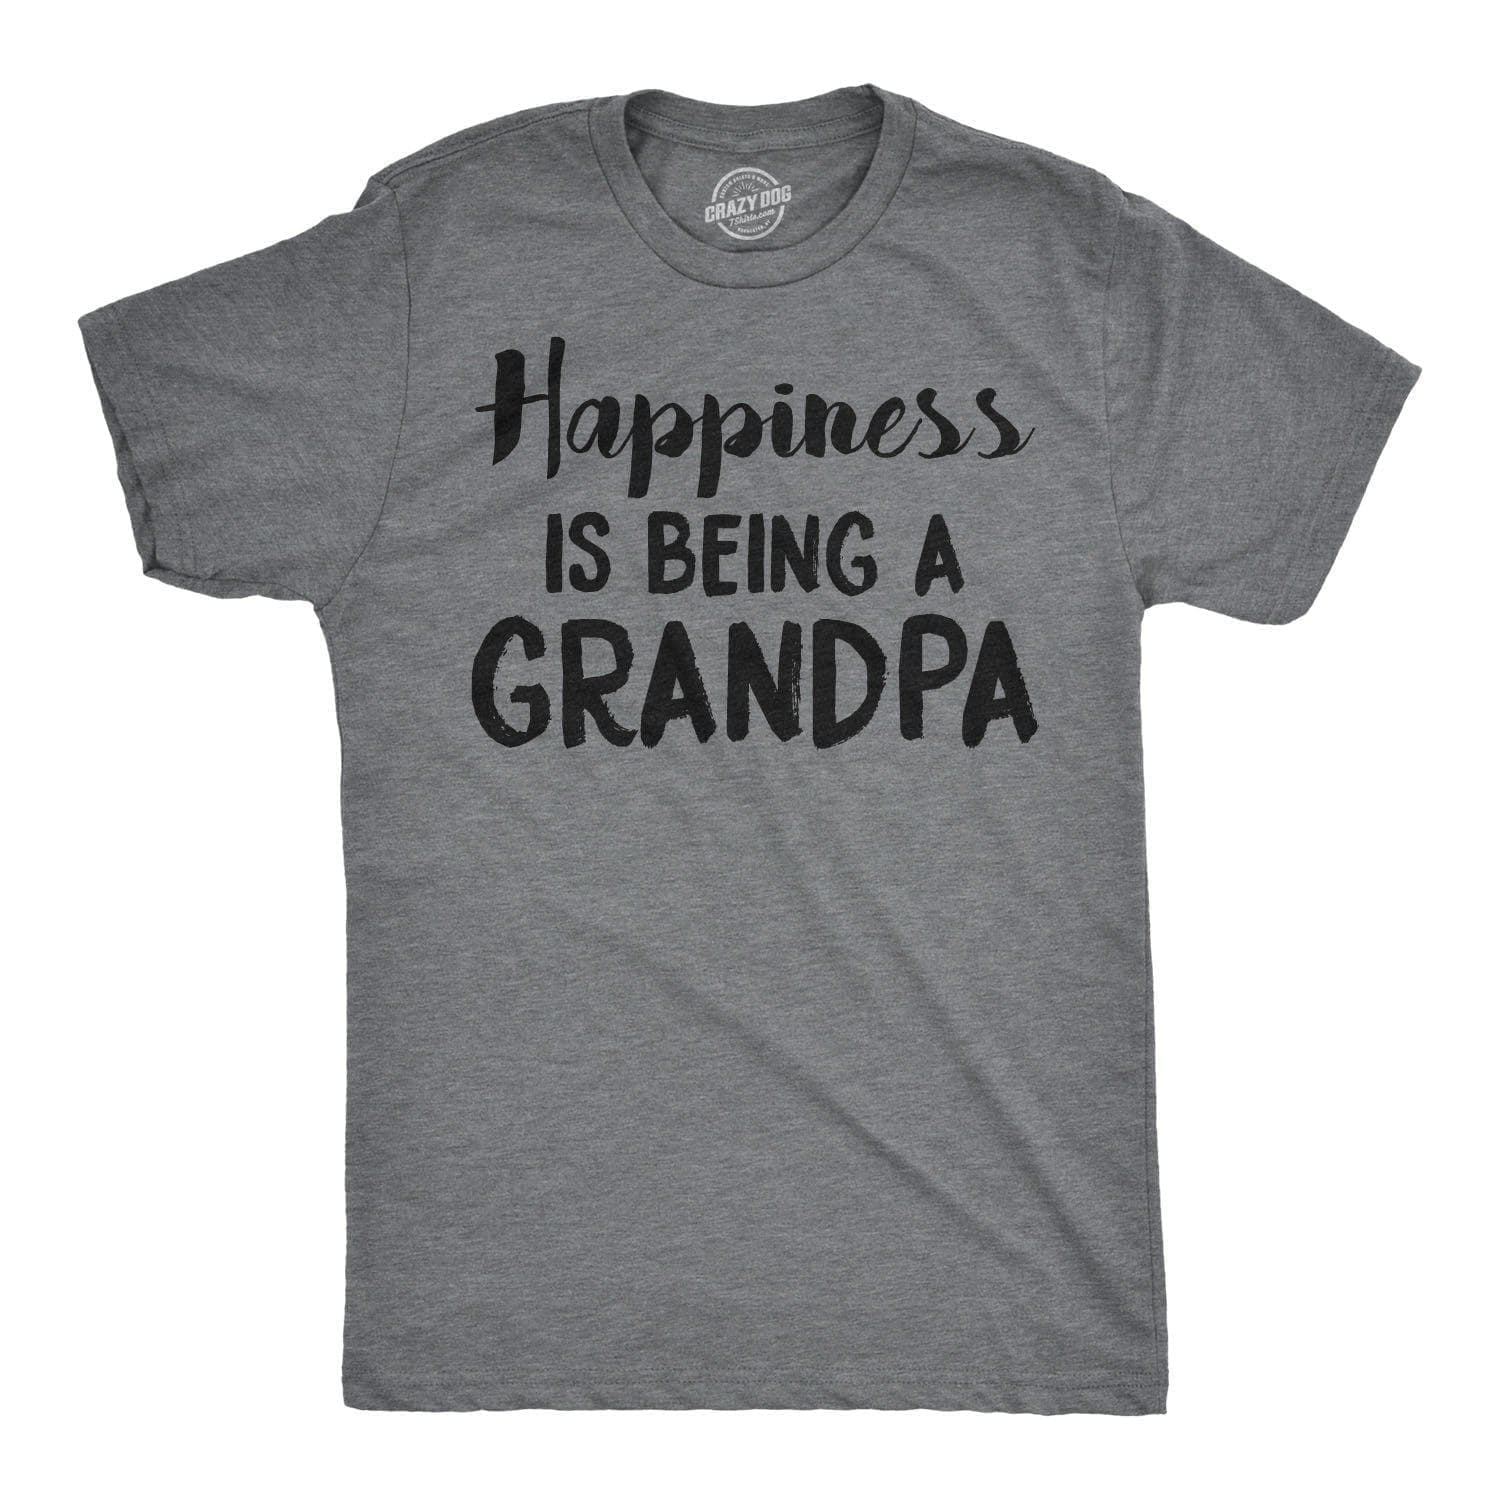 Happiness is Being a Grandpa Men's Tshirt  -  Crazy Dog T-Shirts